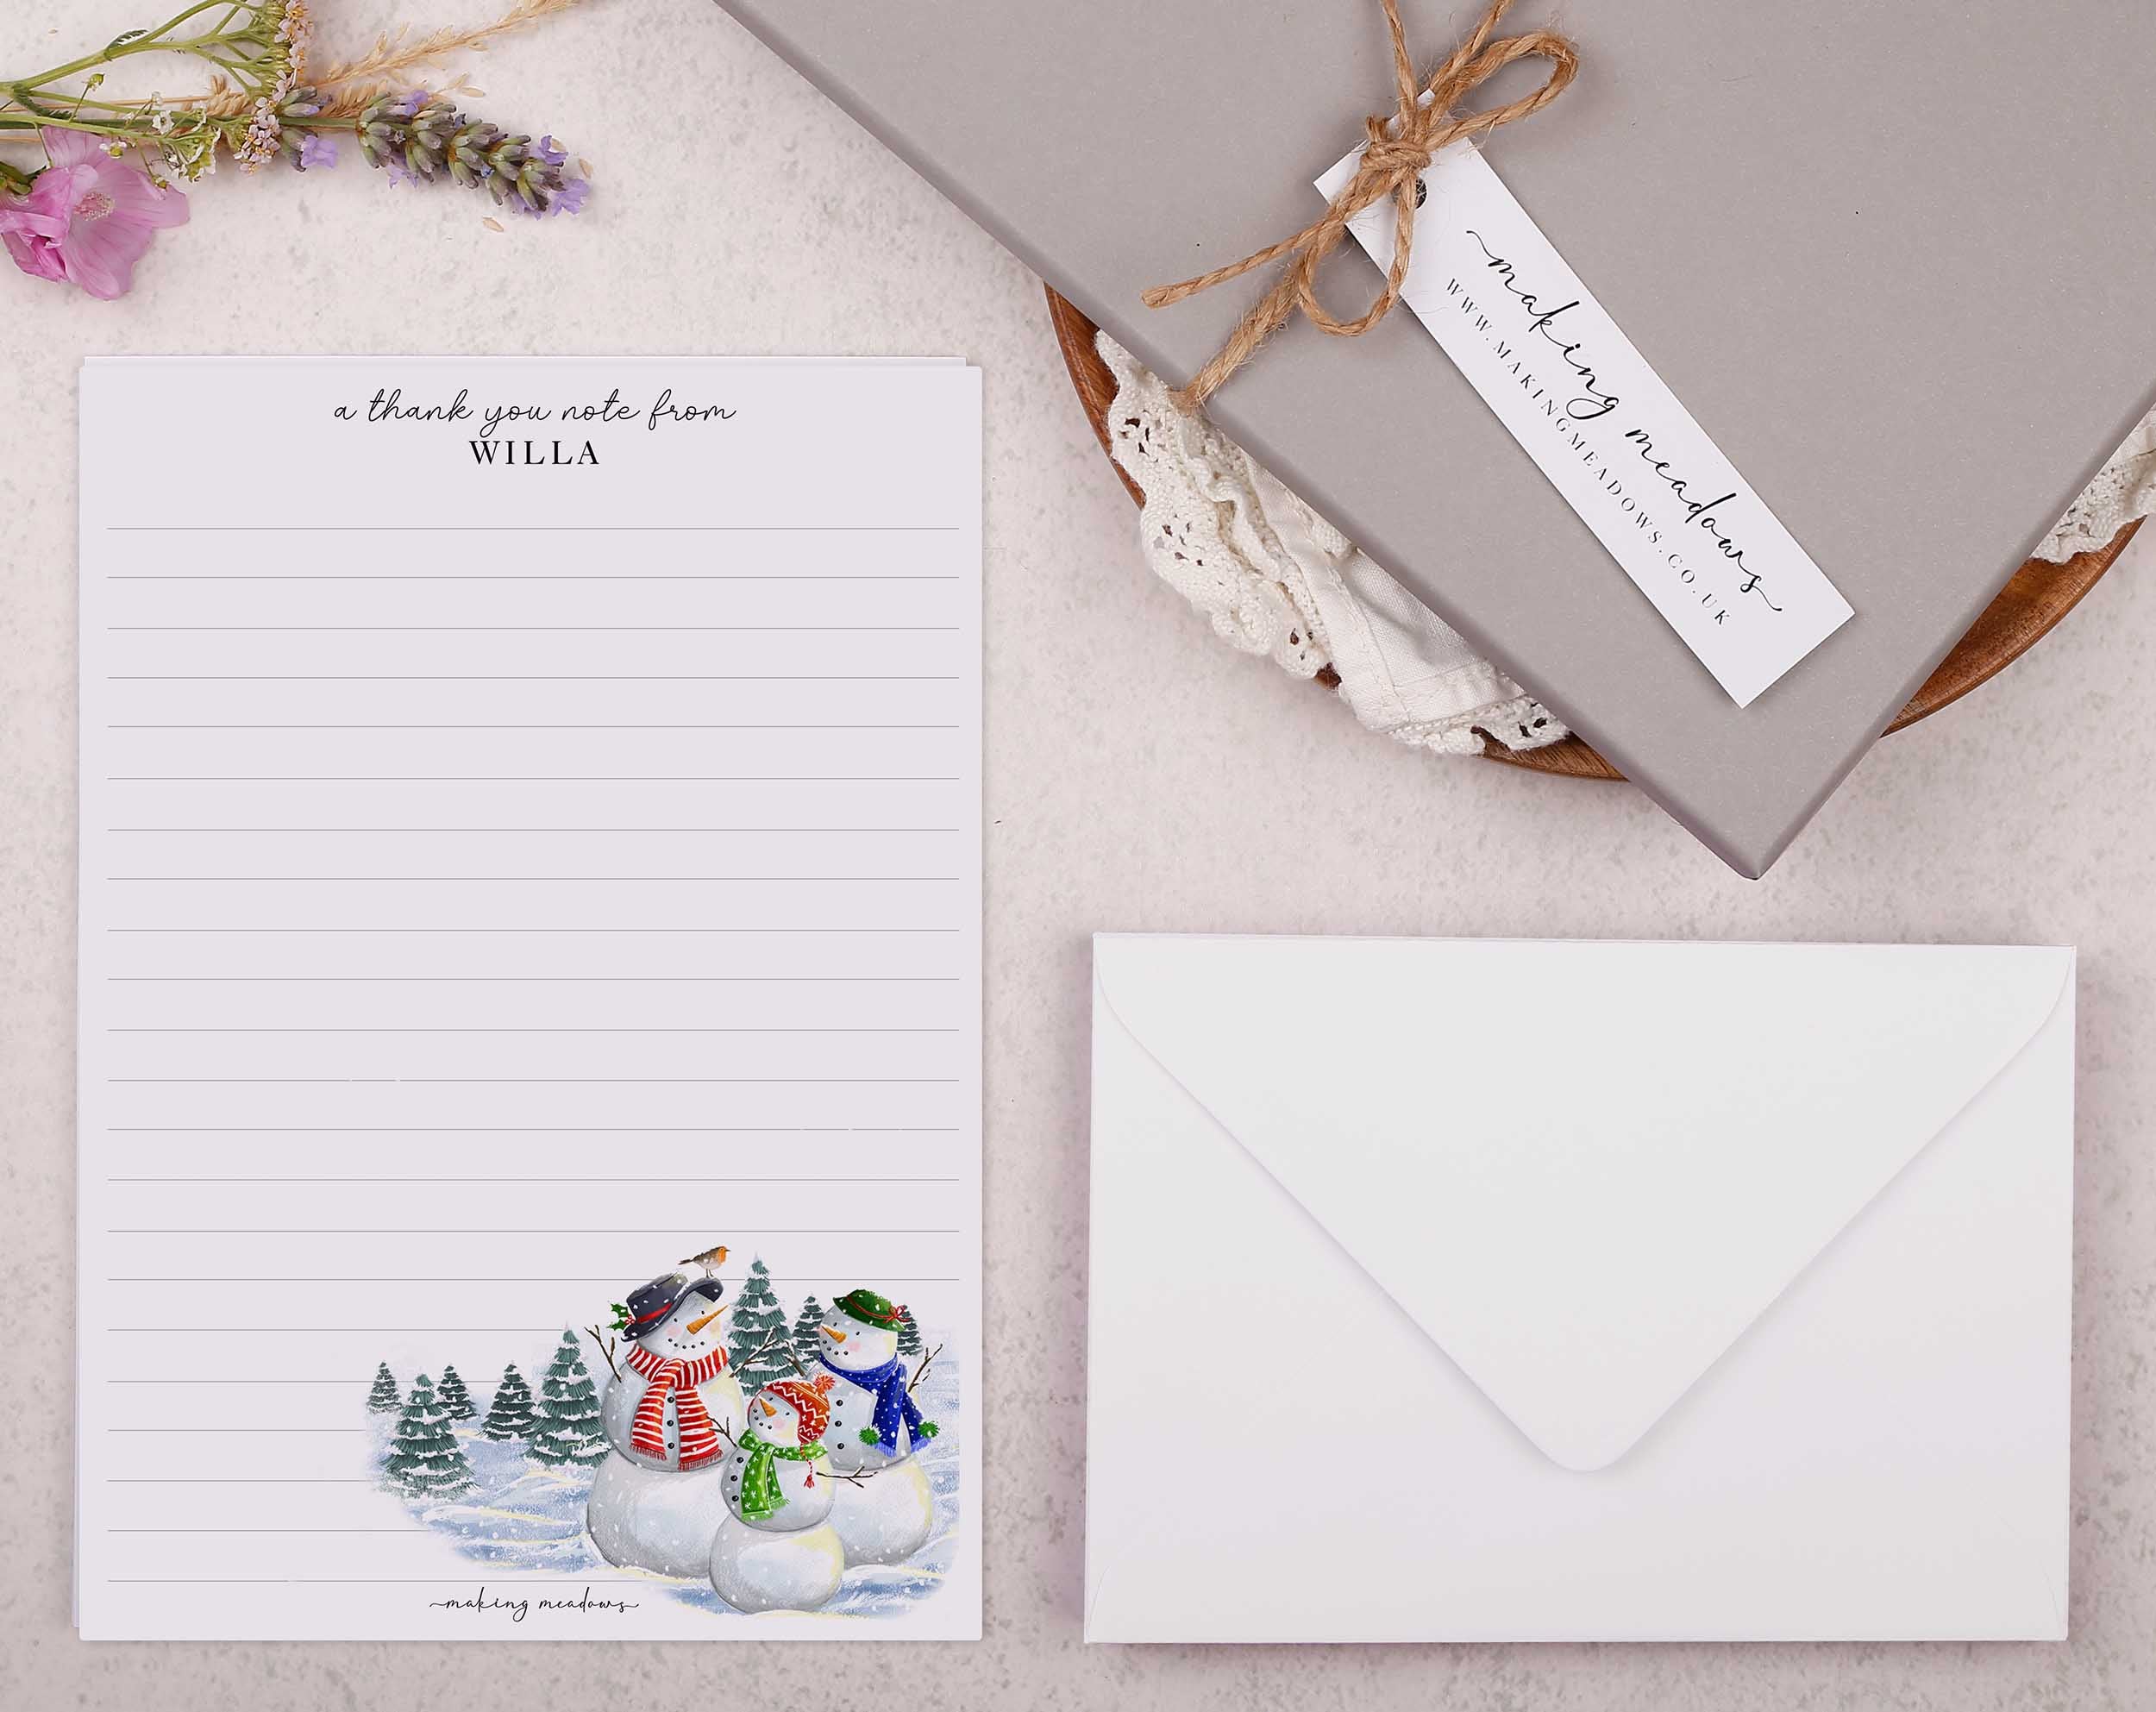 Premium personalised A5 letter writing paper set with a family of snowmen in the forest.